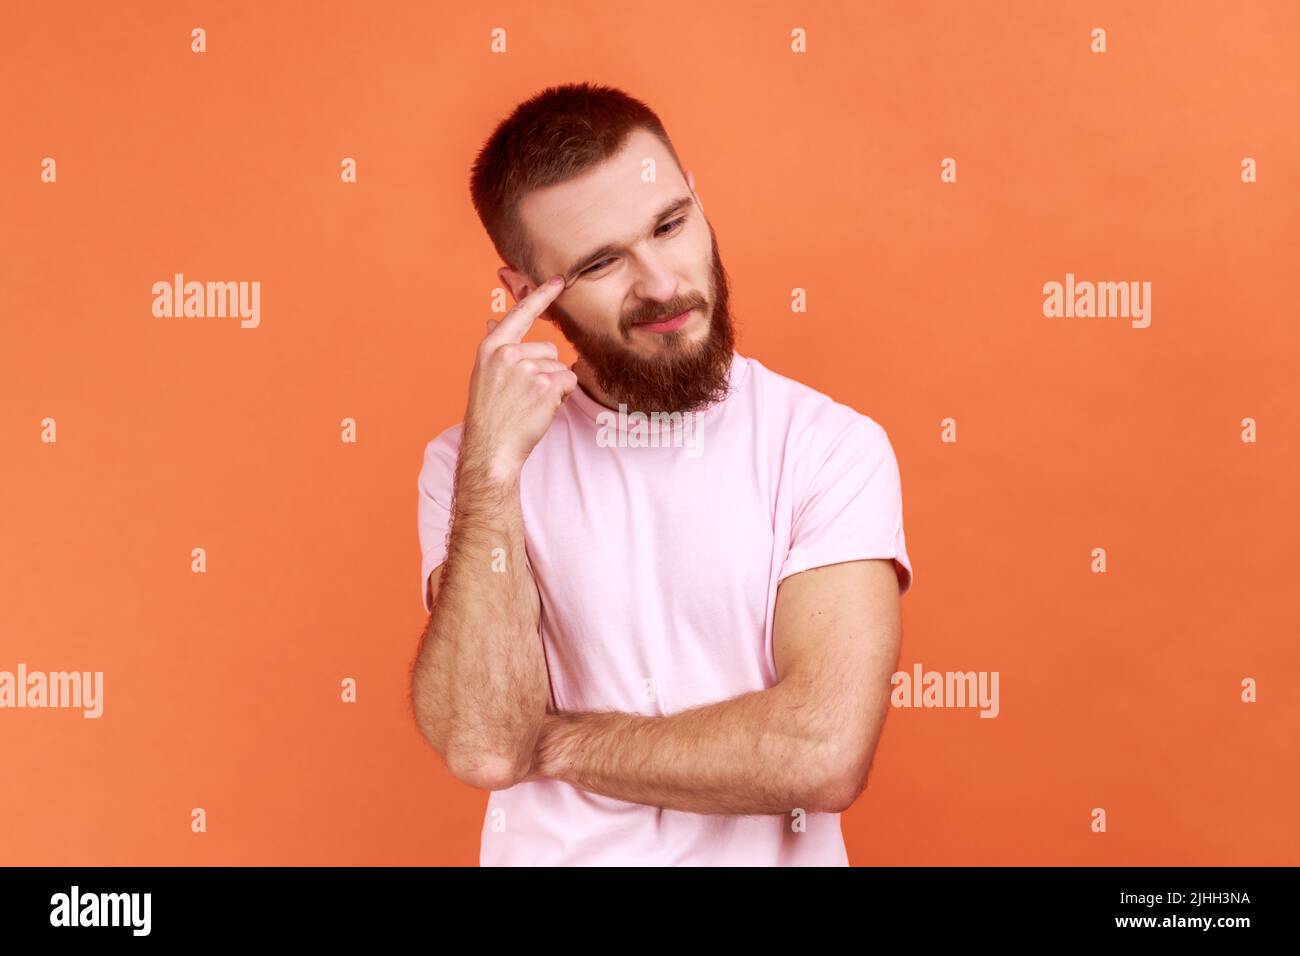 Portrait of bearded man contemplating leaning head on hand, pondering difficult question, trying to make right choice, wearing pink T-shirt. Indoor studio shot isolated on orange background. Stock Photo